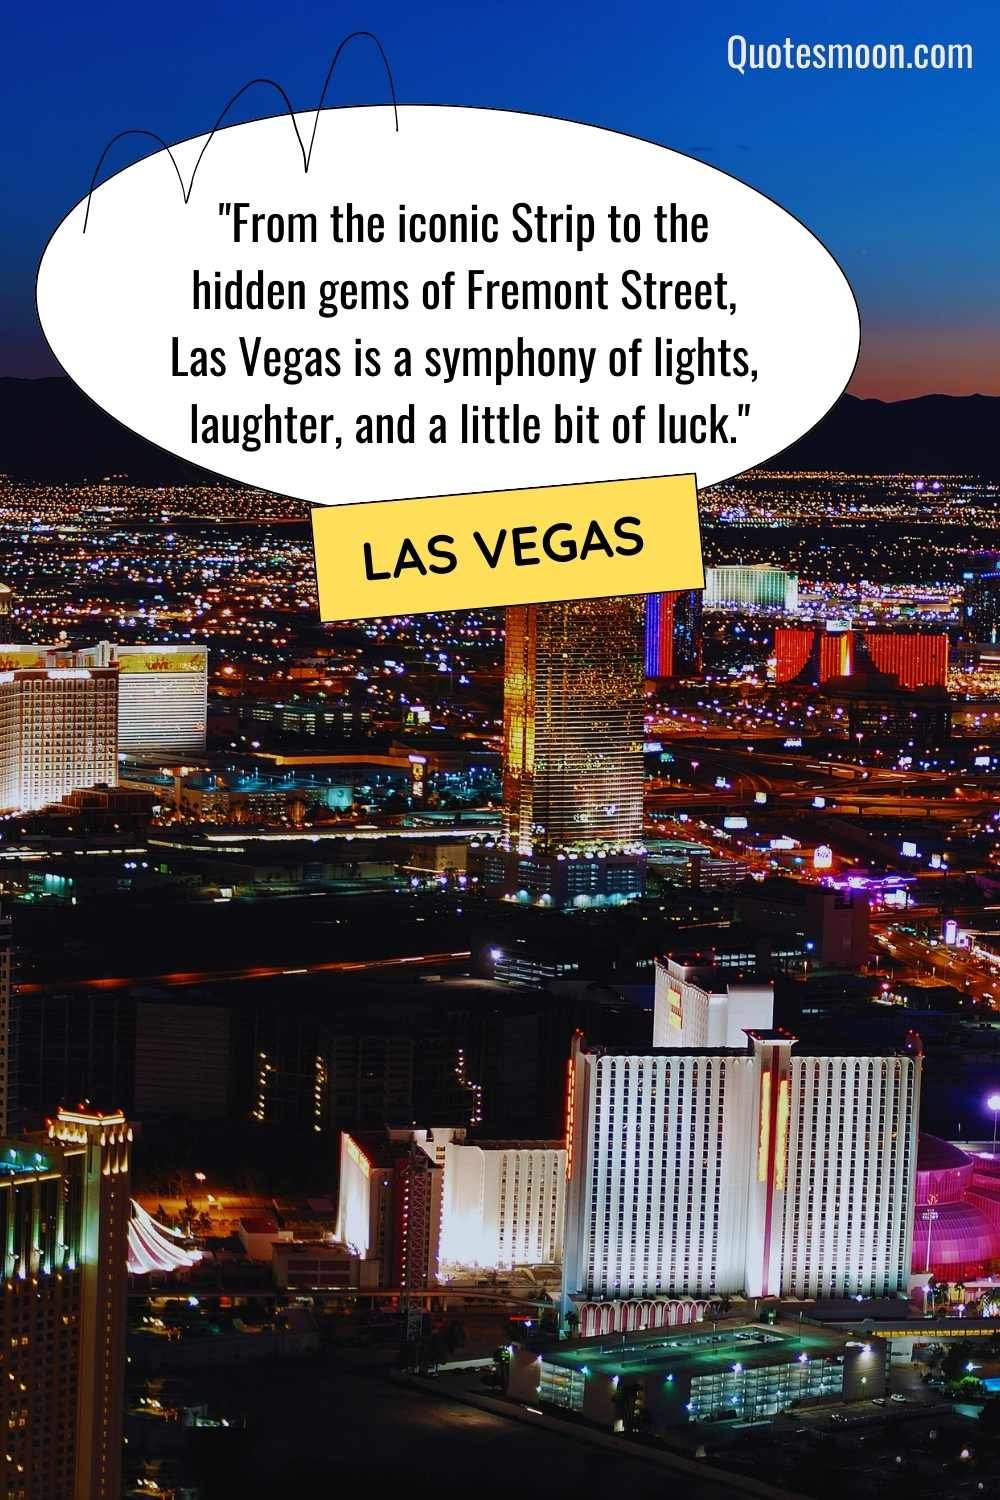 Las Vegas quotes That You'll Love with images HD